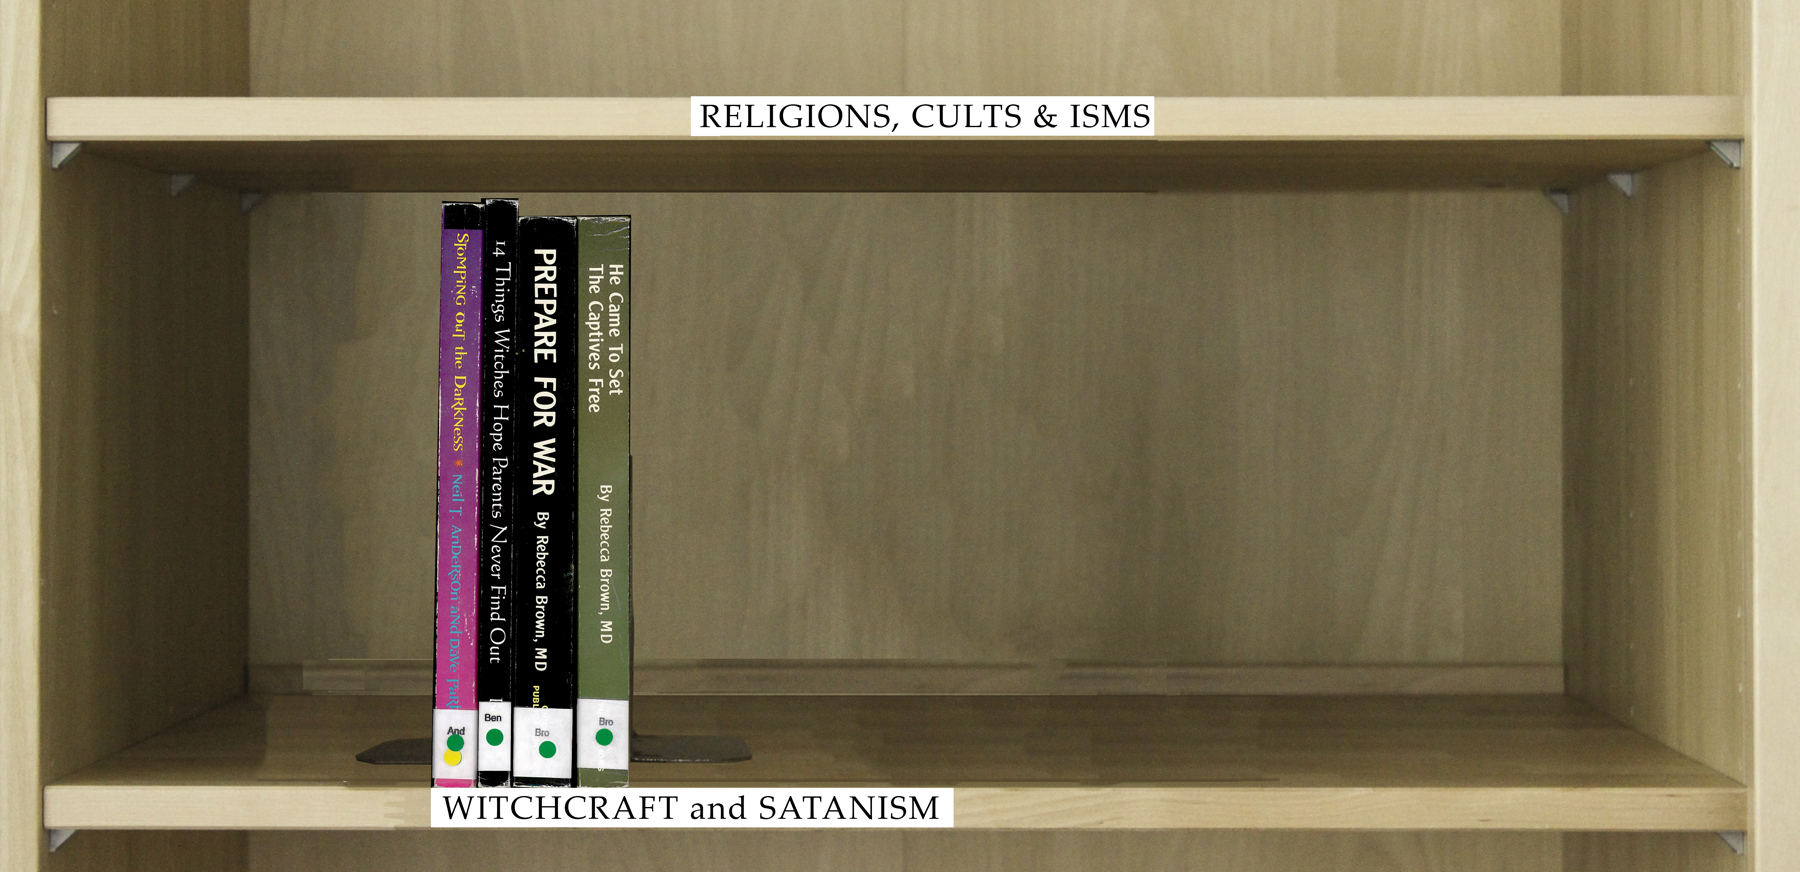 Index of Books Under the Category Witchcraft and Satanism.